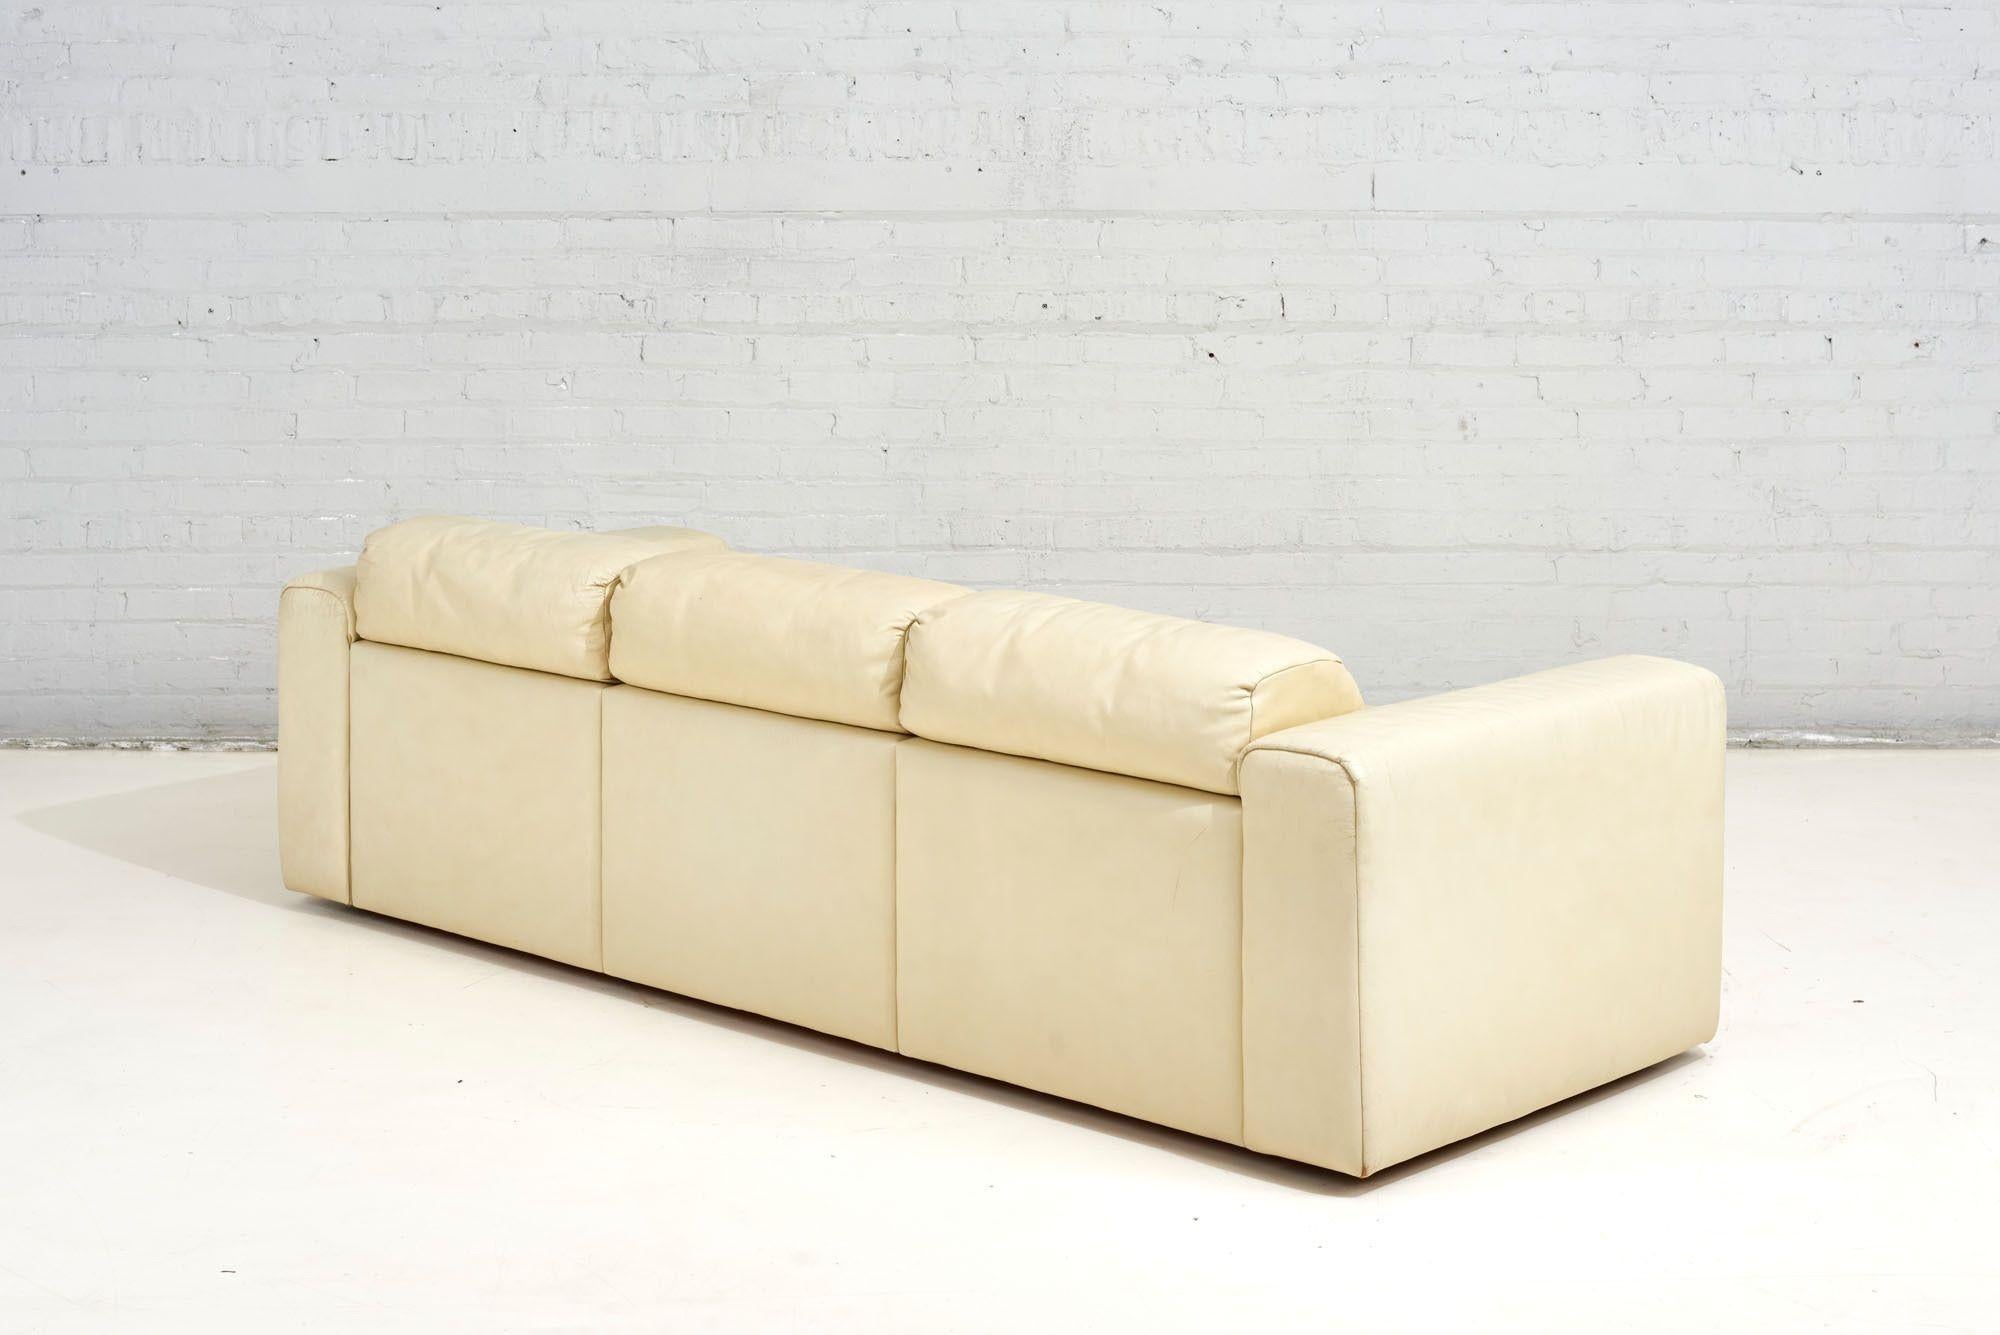 Baron Sofa by Robert Haussmann for Stendig, Cream Leather, 1970 For Sale 1